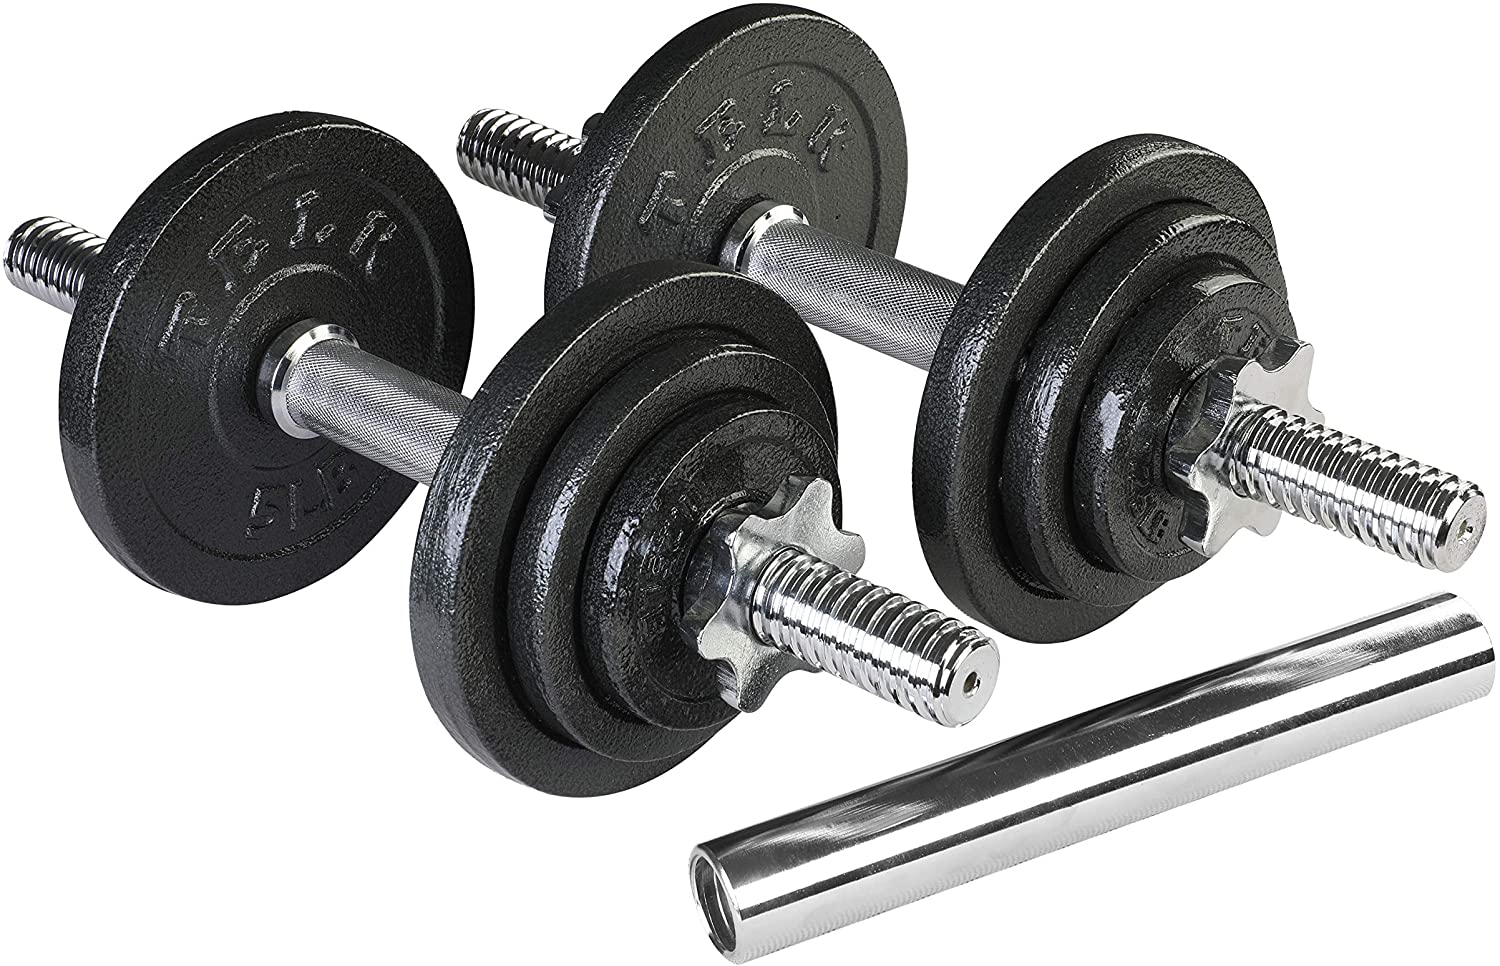 Telk Fitness Adjustable Dumbbells 45 Lbs., Hand Weights for Home Gym - image 1 of 6